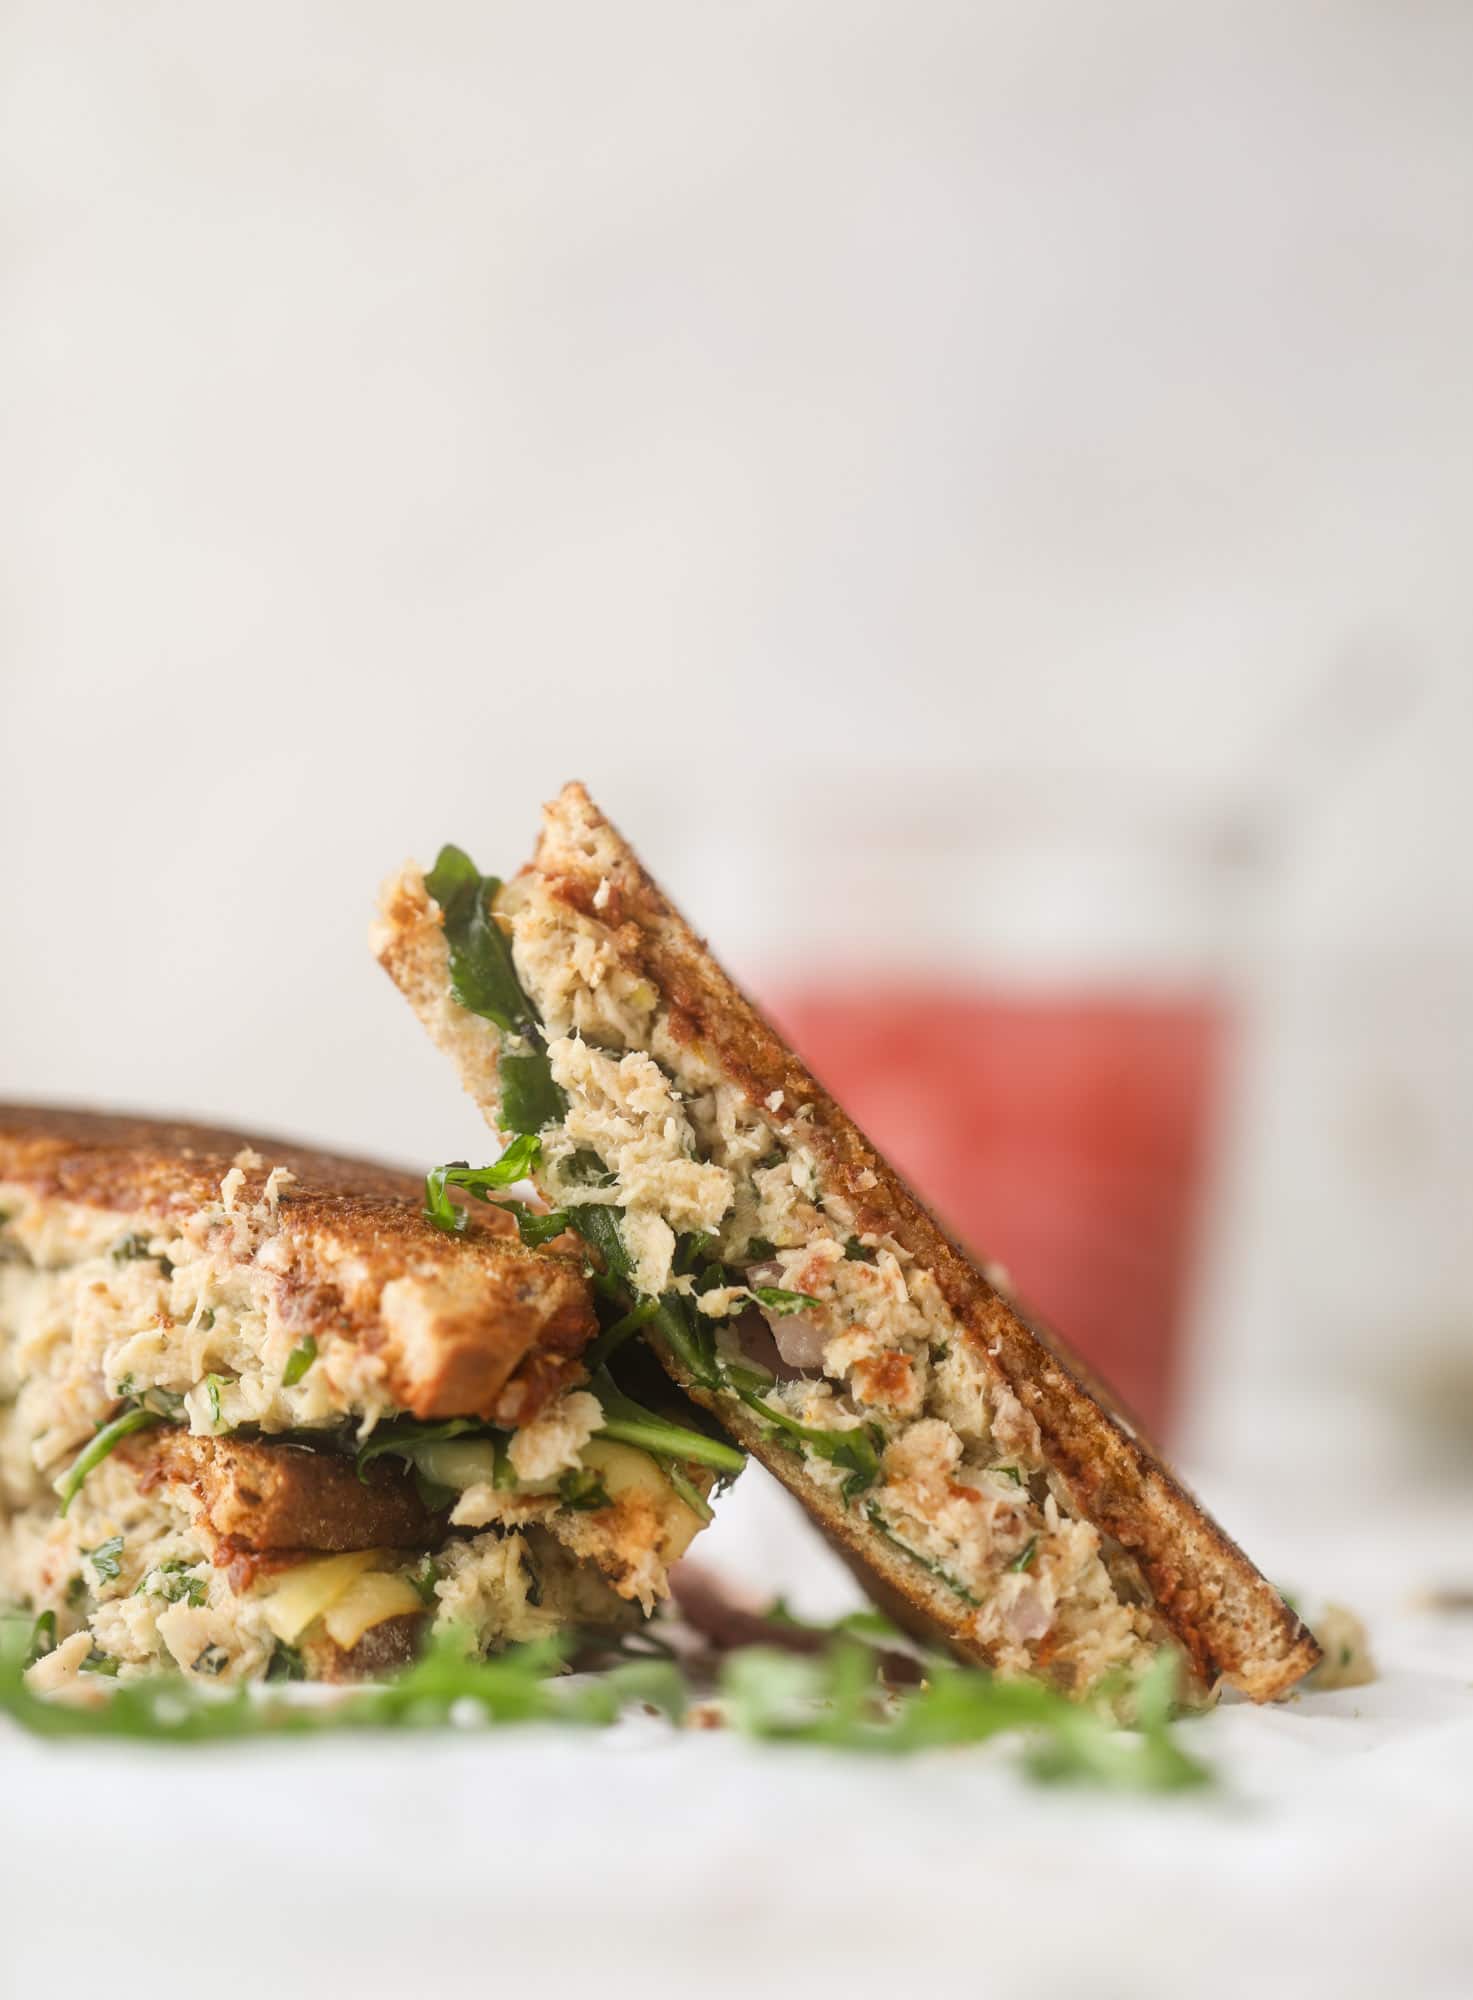 This tuscan tuna melt is a modern way to enjoy a tuna sandwich, with peppery arugula, melty cheese, pickled onions and sun dried tomato spread! I howsweeteats.com #tuna #melt